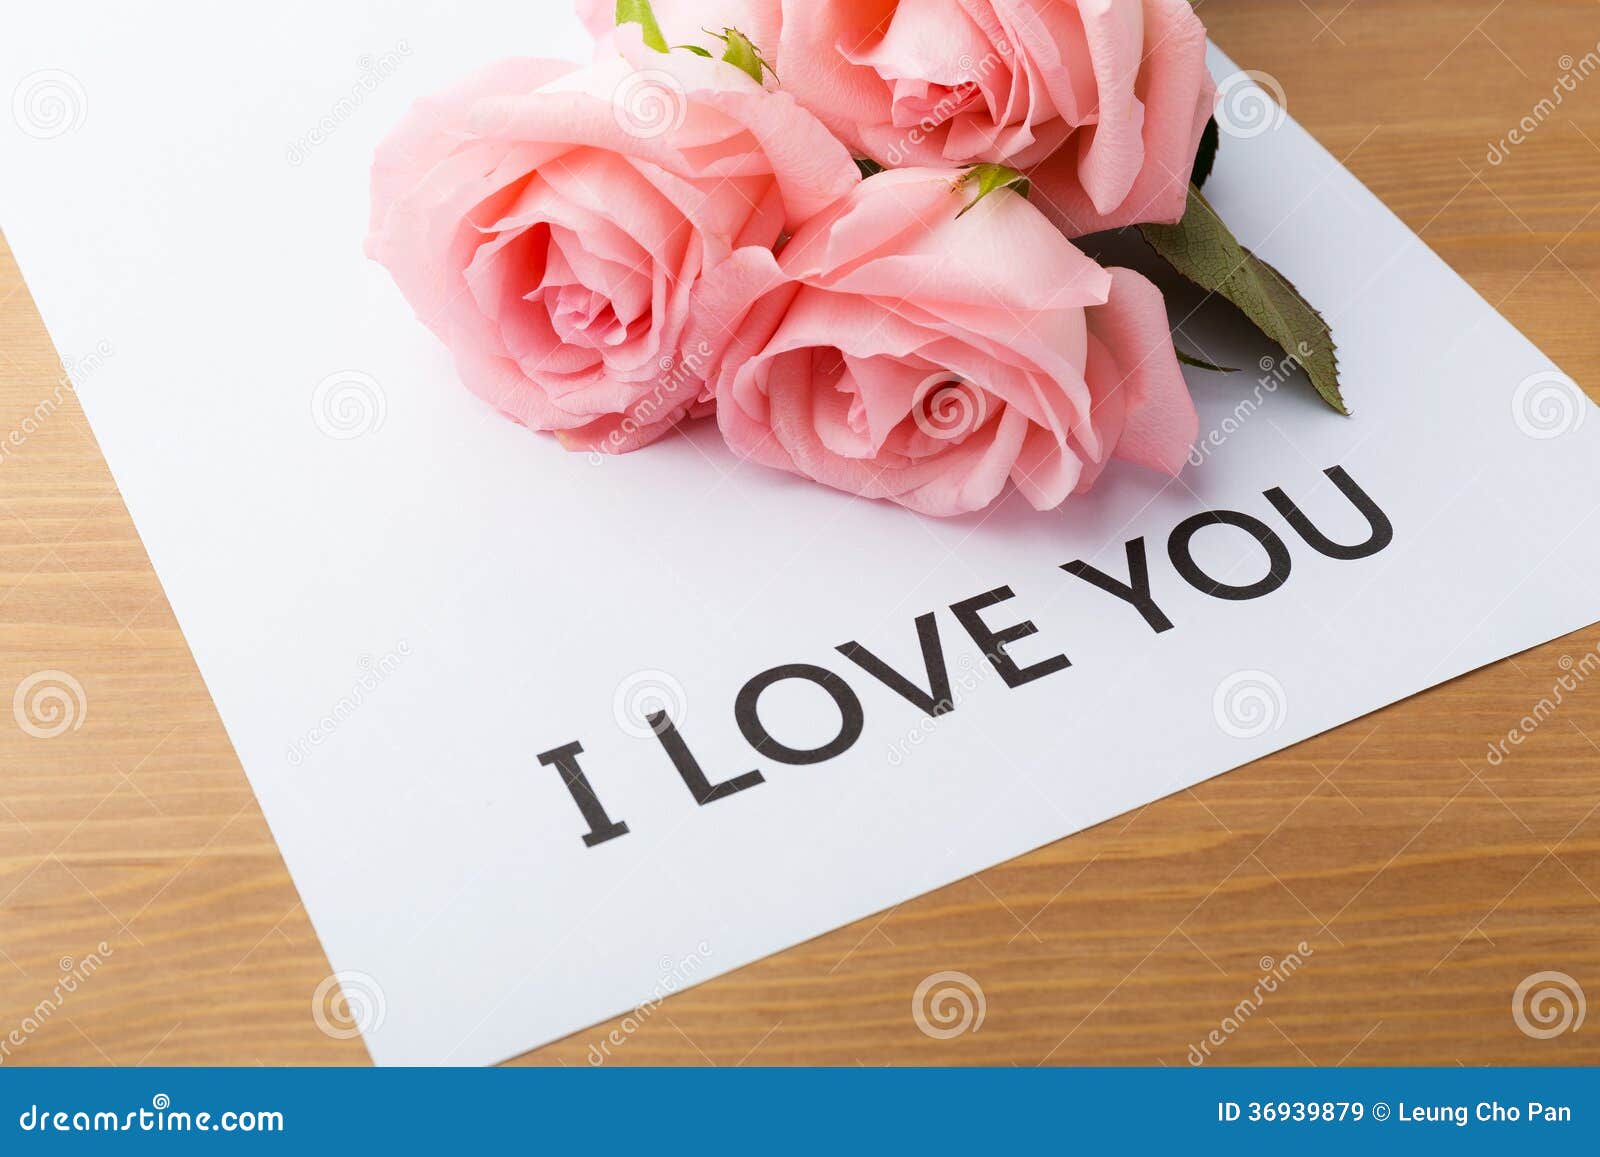 Pink Rose and Gift Card of Message I Love You Stock Image - Image ...